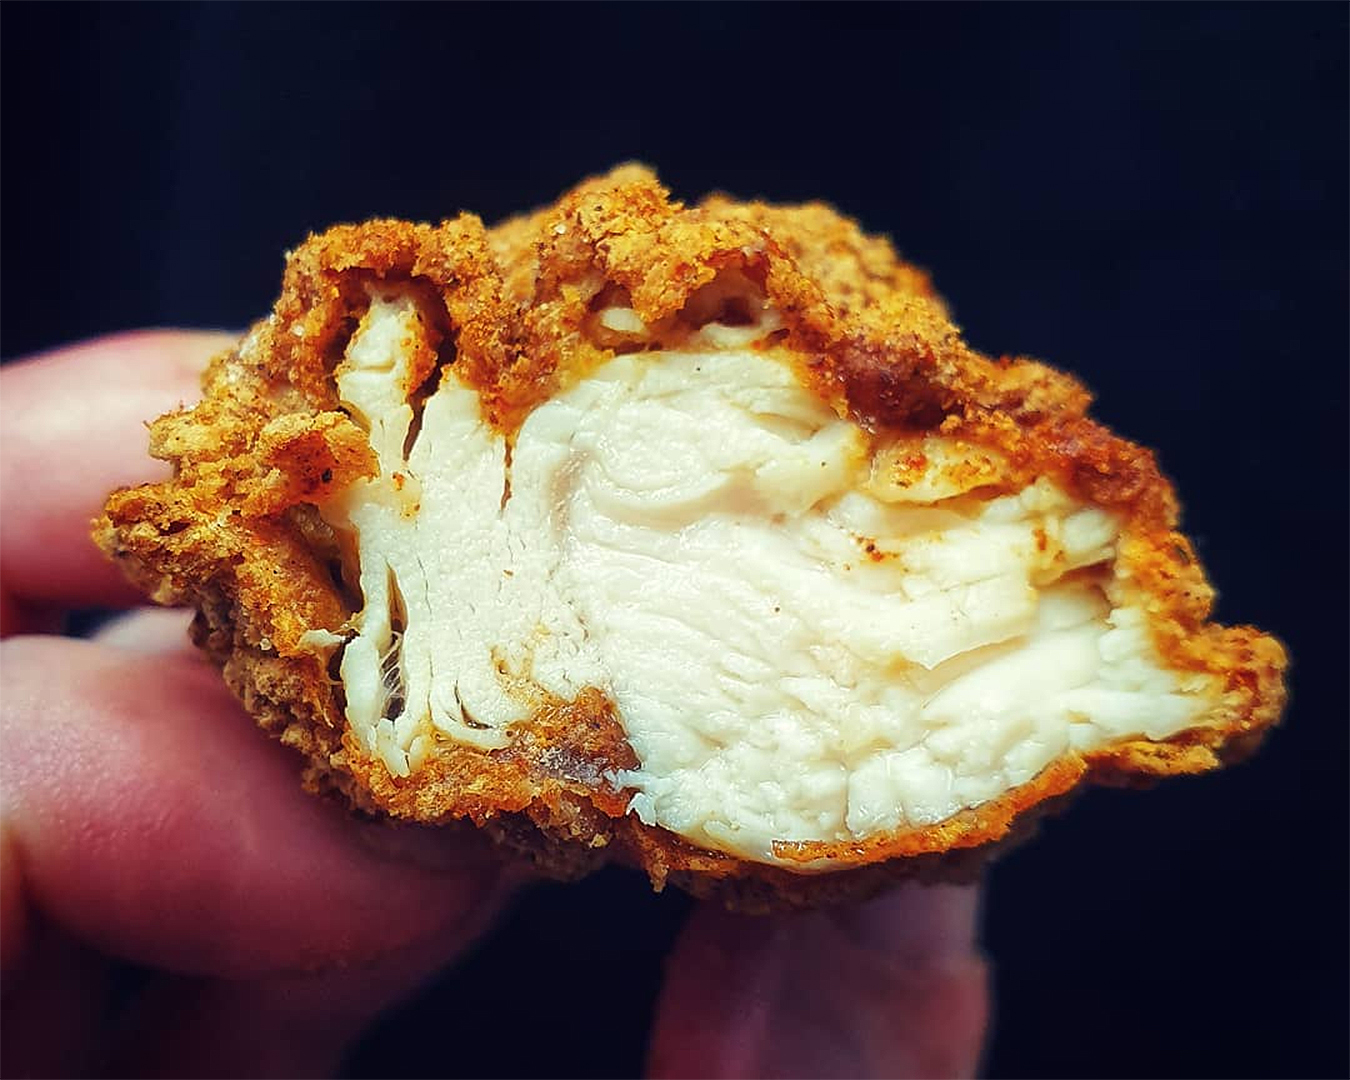 The cross section of a delicious piece of chicken.